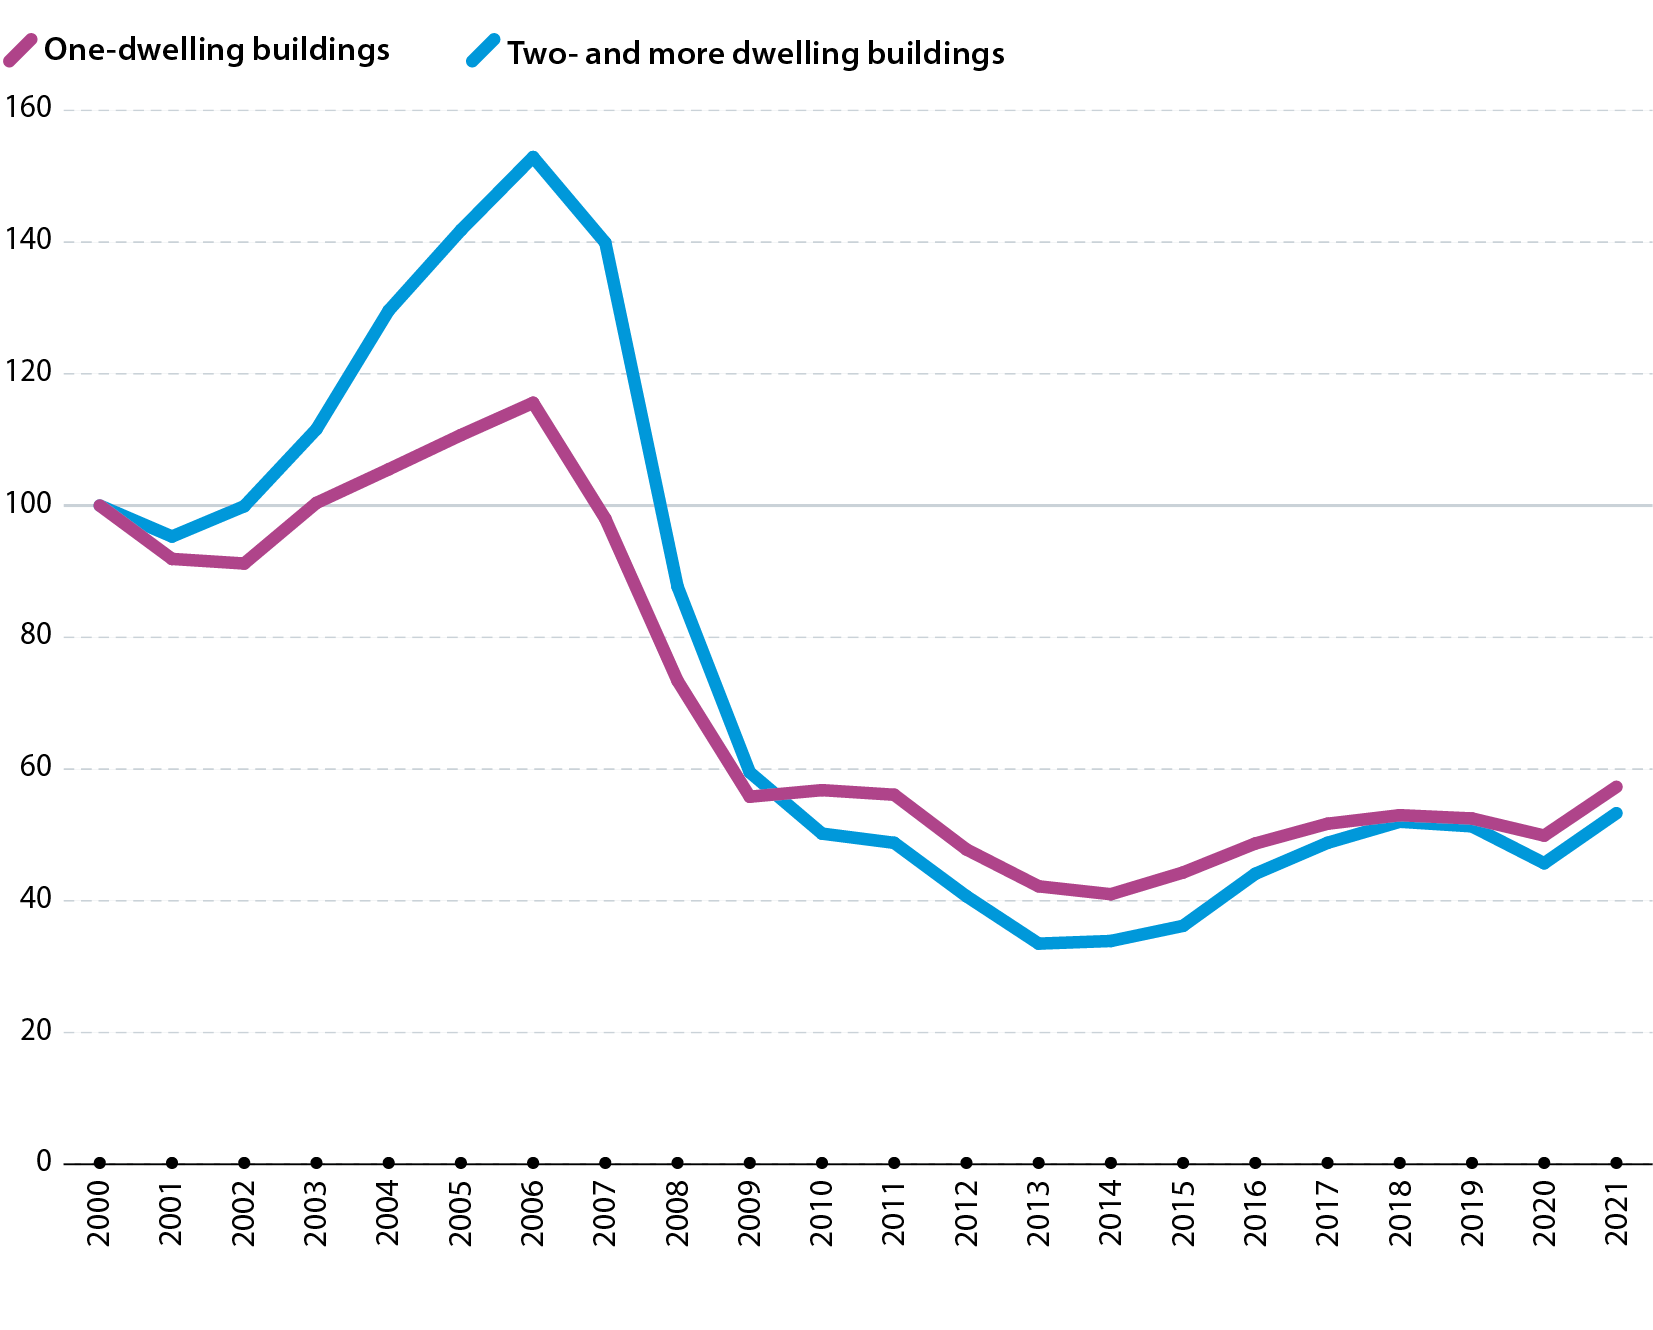 Building permit index. Data for the EU. Annual data for 2000 to 2021. One-dwelling buildings and two- and more dwelling buildings. Line graph. In 2021, the building permit index in the EU was 57% higher than it had been in 2000 for one-dwelling buildings and 53% higher for two- and more dwelling buildings.